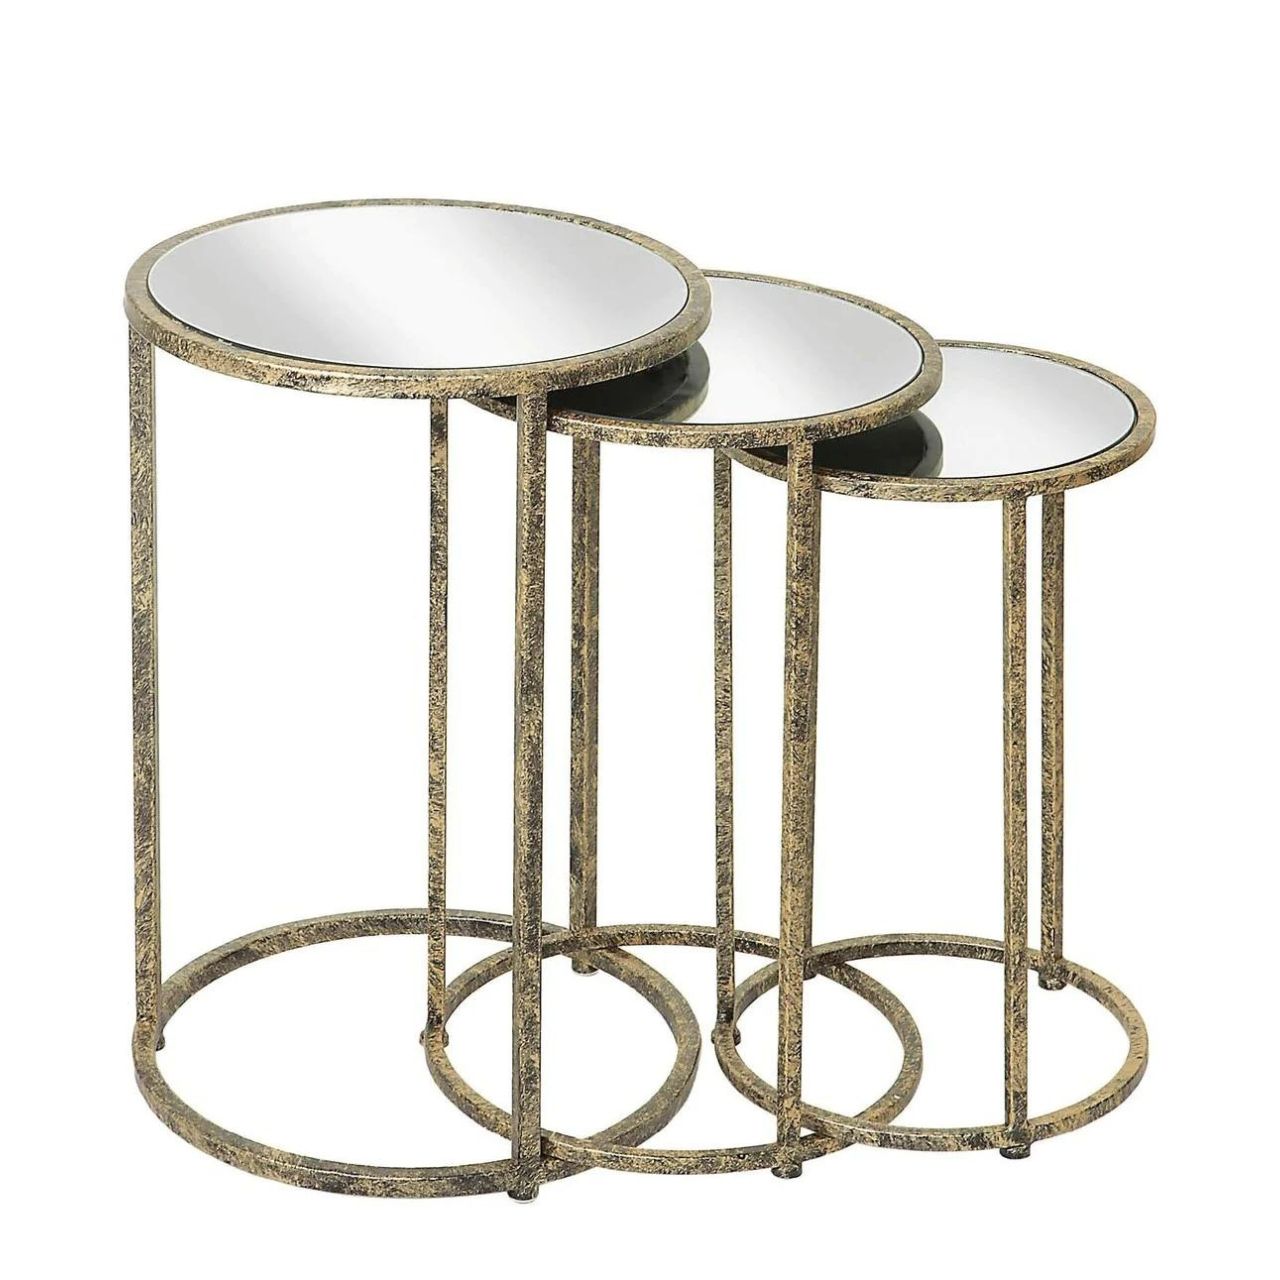 Mindy Brownes Mirror Top Nest of Tables Set of 3  Three Pod Tables that neatly stack on top of one another. Champagne gold colour in finish and a mirror top. A beautiful addition to any home. These tables only stack on top of one another, or side by side, underneath bars should not be crossed. 